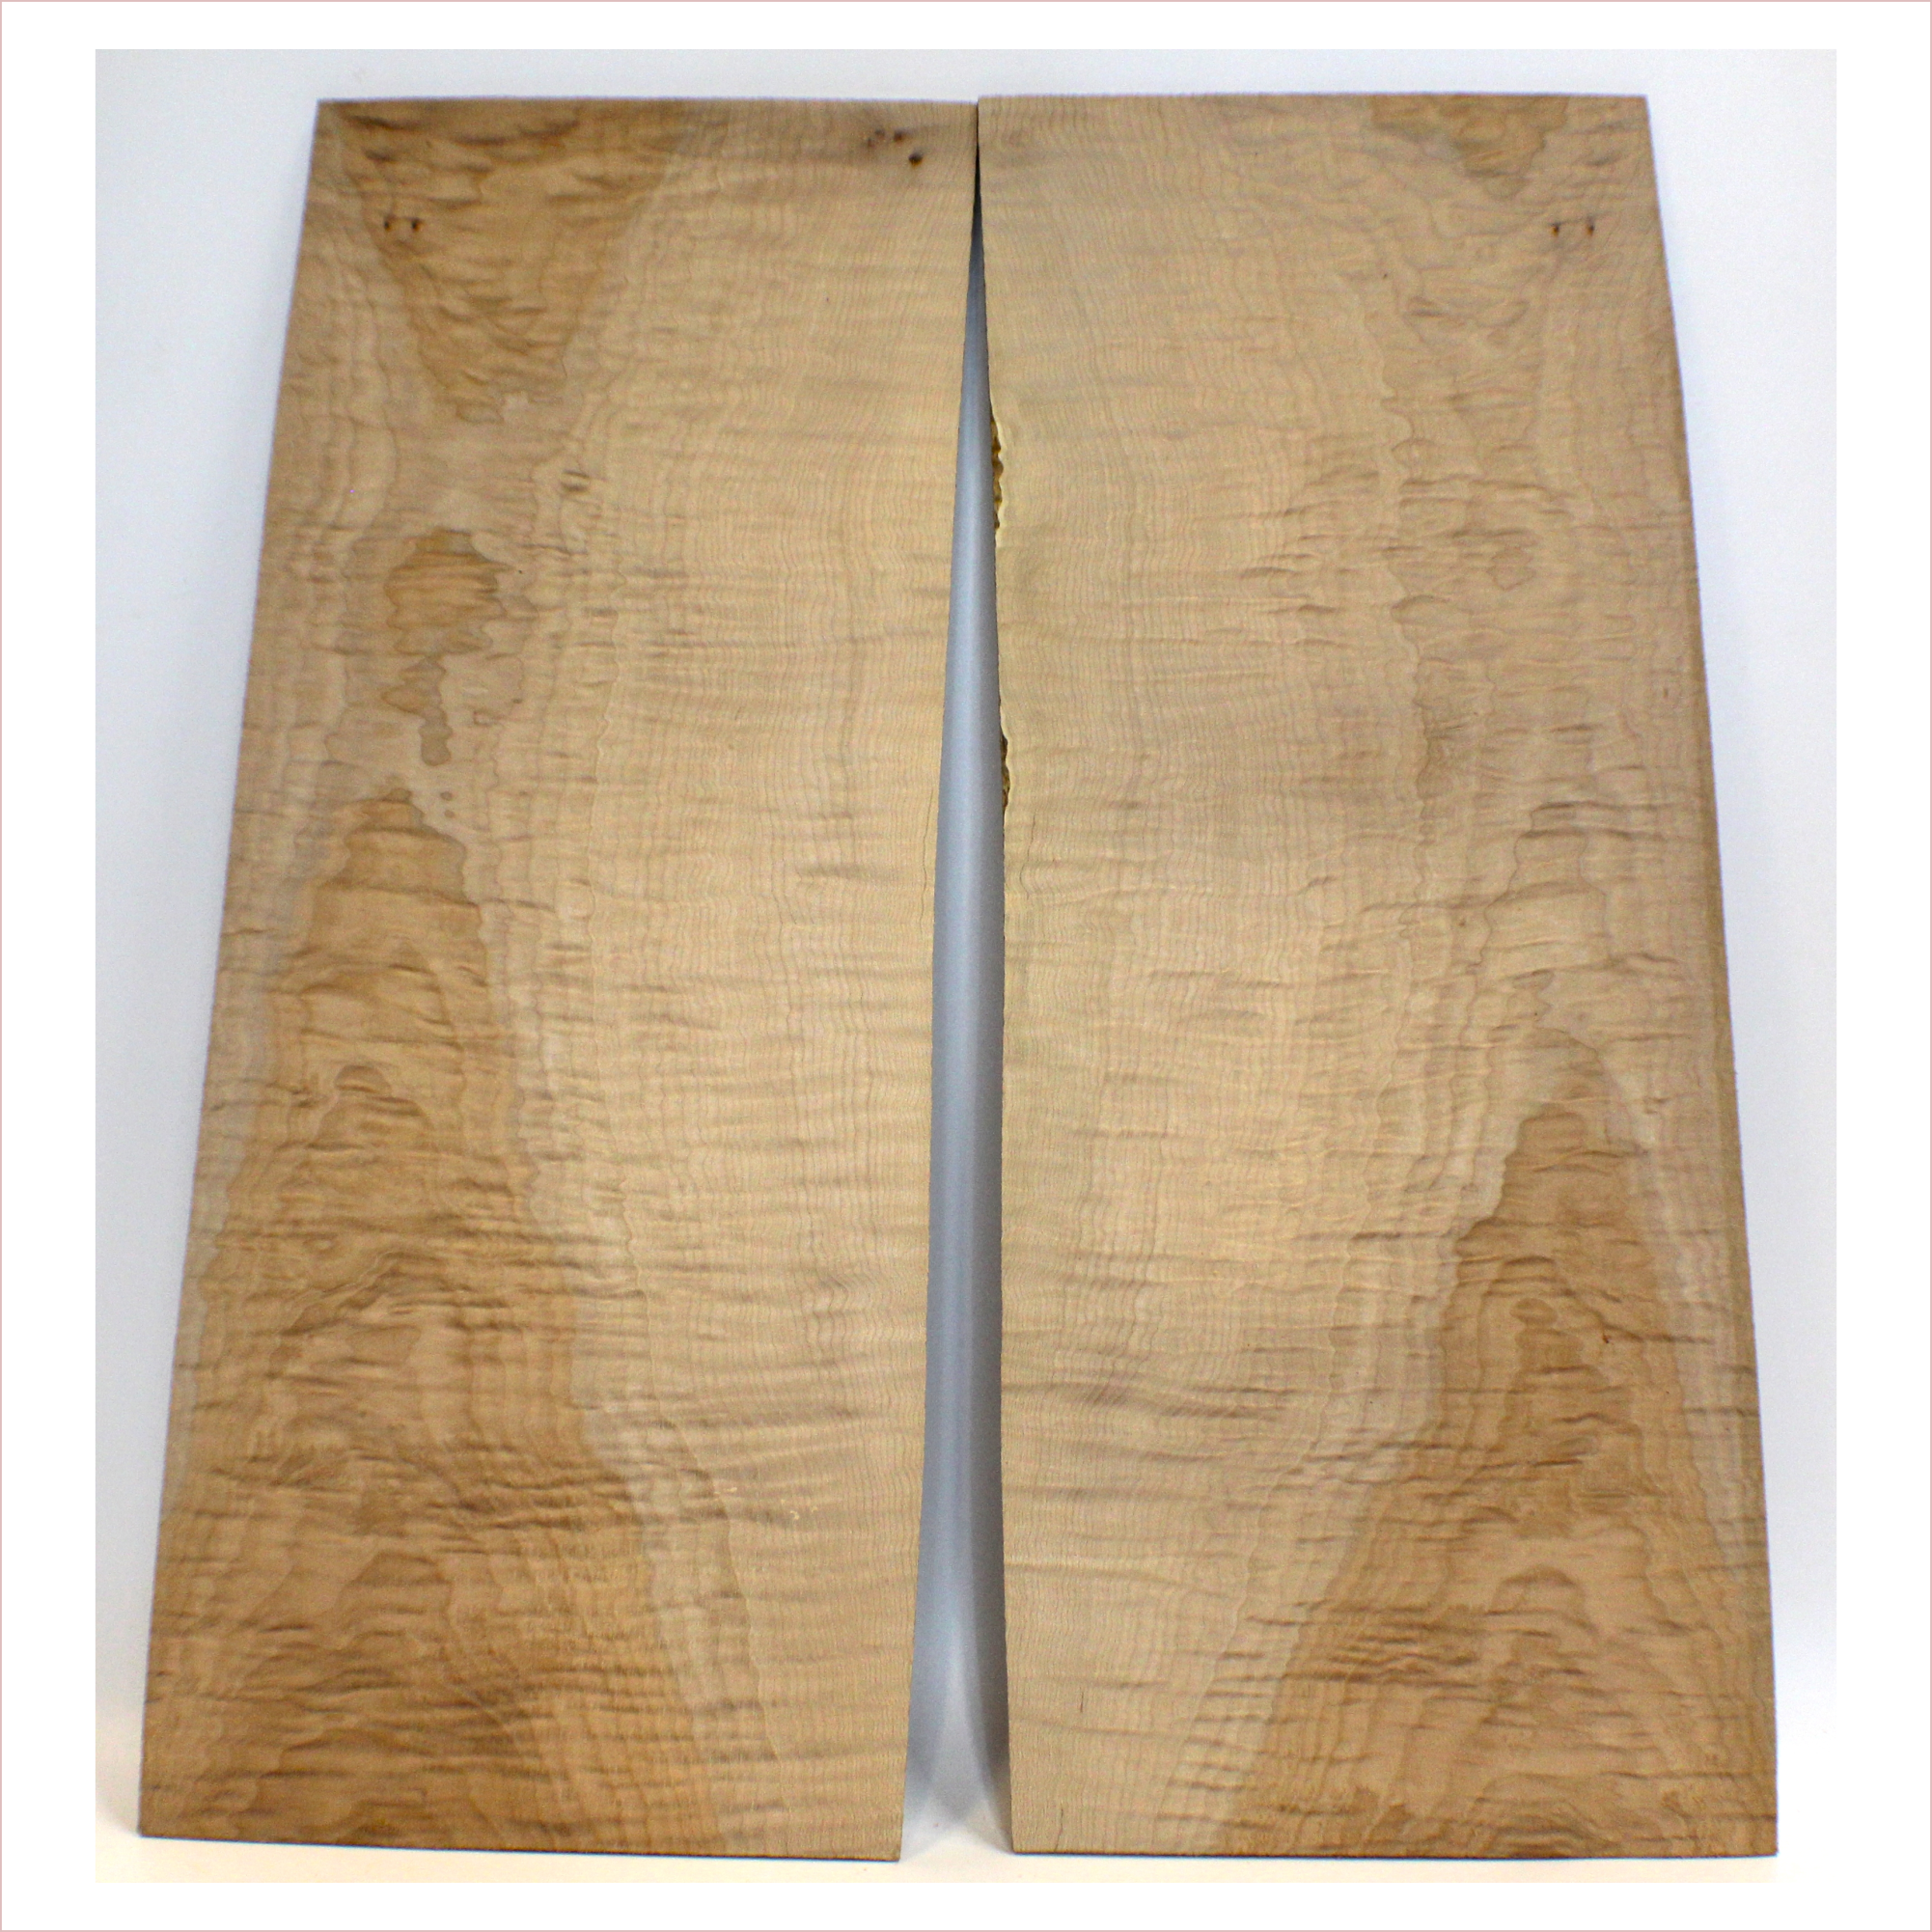 Two-tone, flat-sawn flame maple set with 5A figure and no defect.  This set has been sanded to 400 grit.  Dimensions: Thickness (each piece): .25